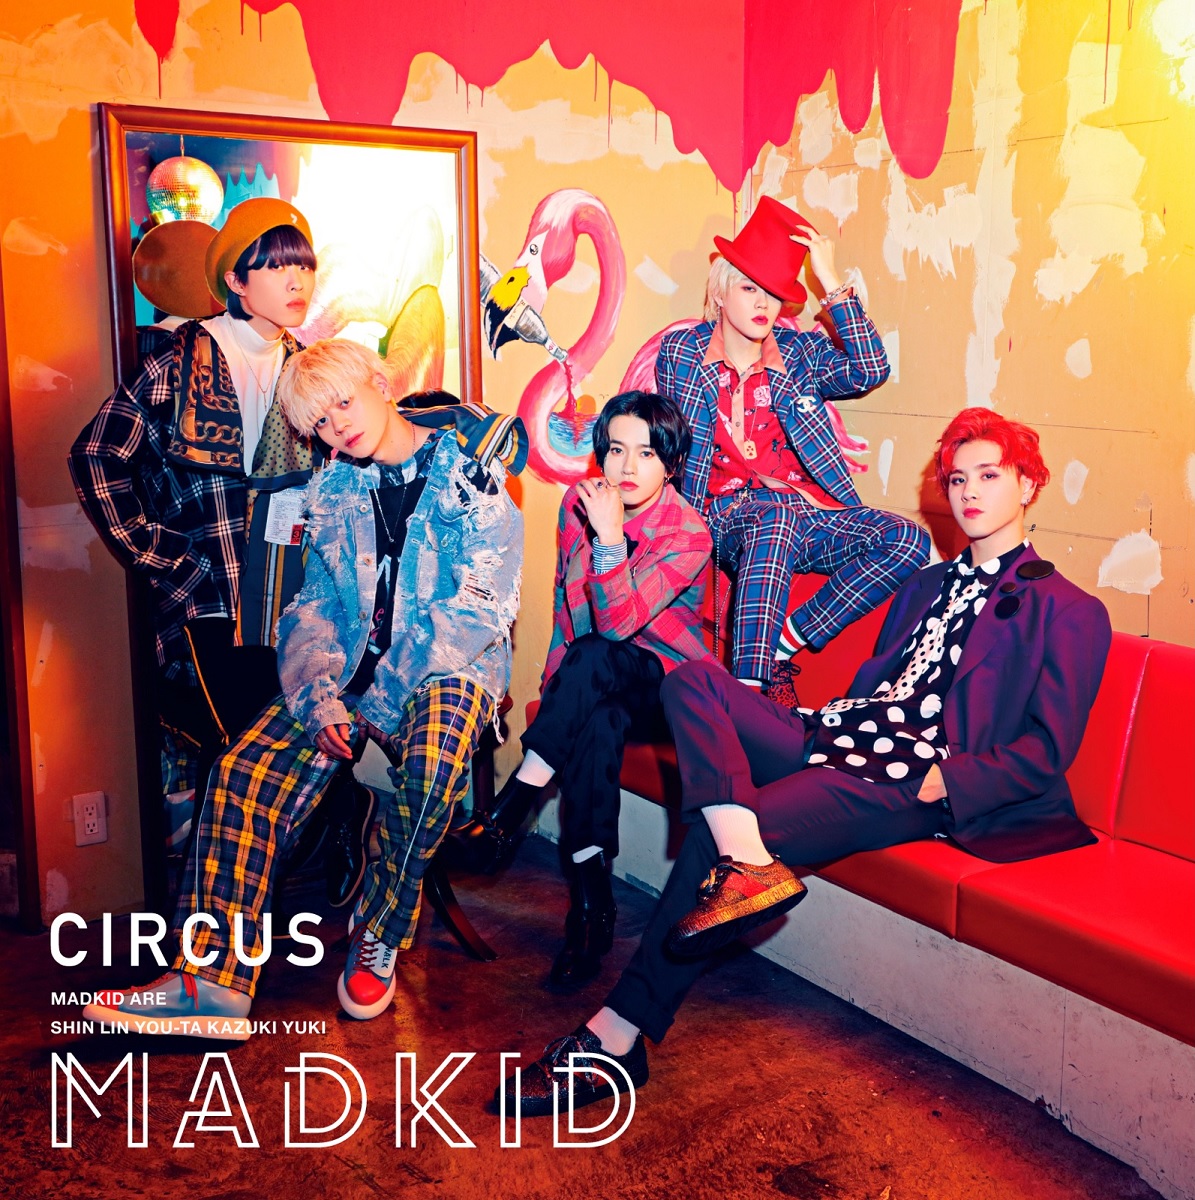 Cover for『MADKID - FAITH』from the release『CIRCUS』